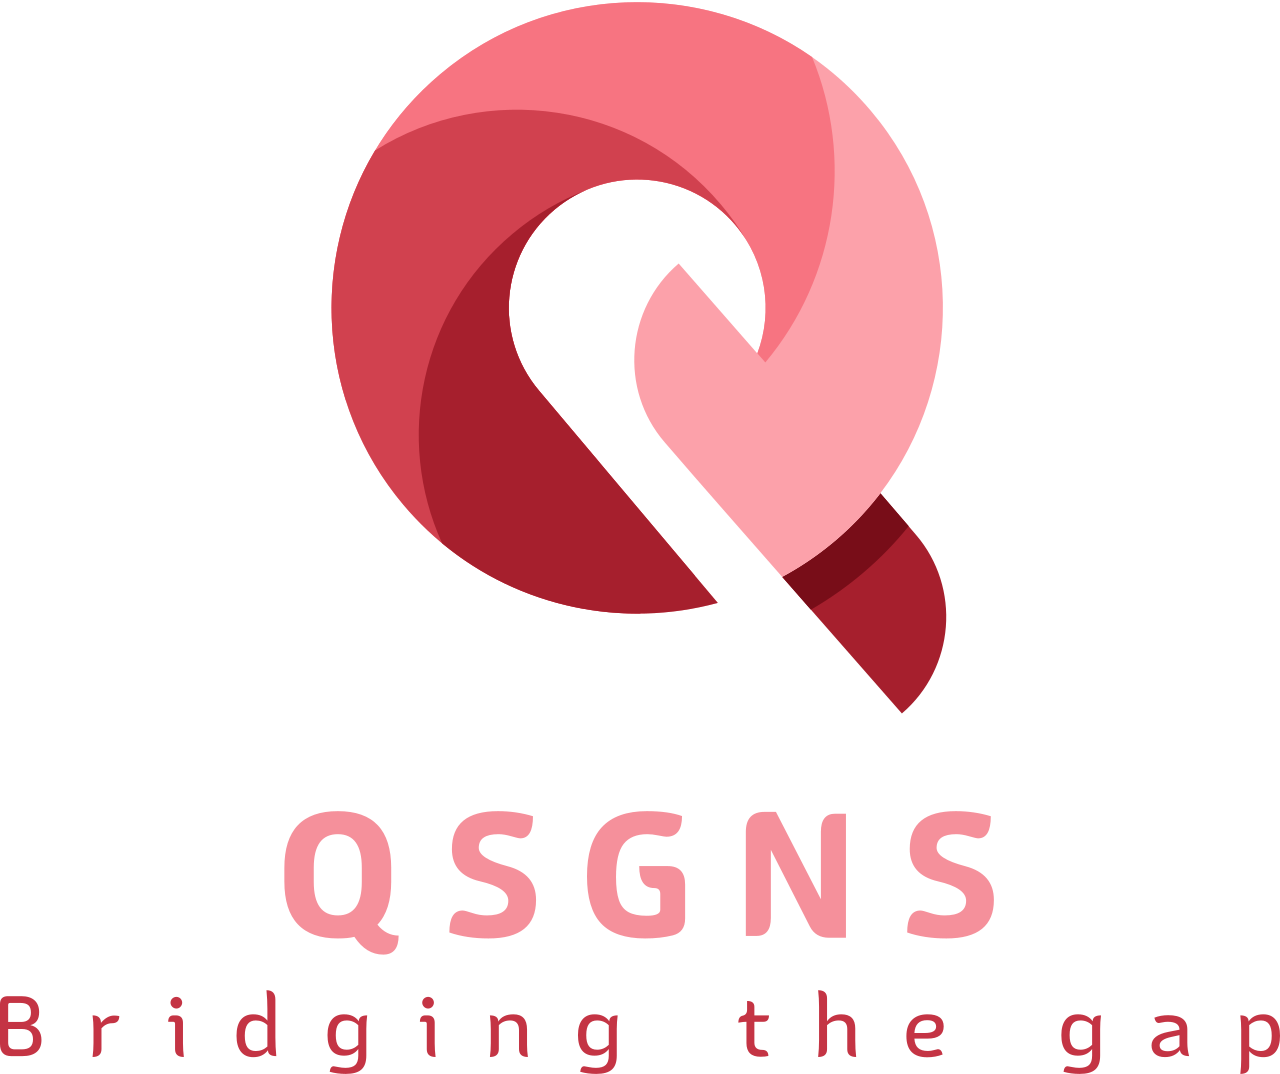 QSGNS's web page